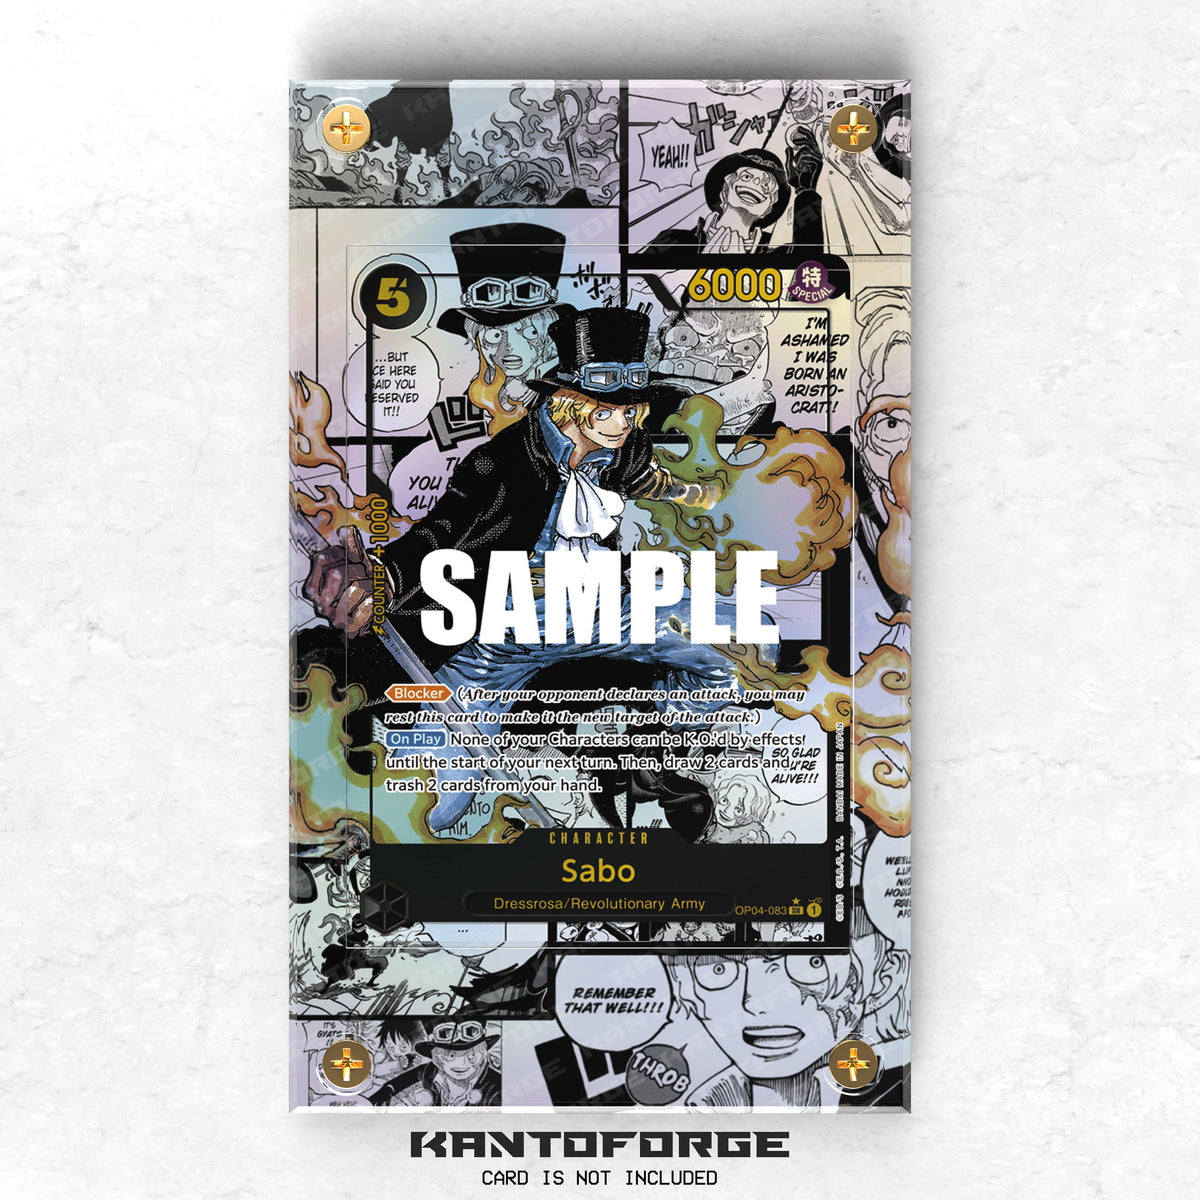 Sabo Manga 0P04-08 - One Piece Extended Artwork Protective Card Display Case